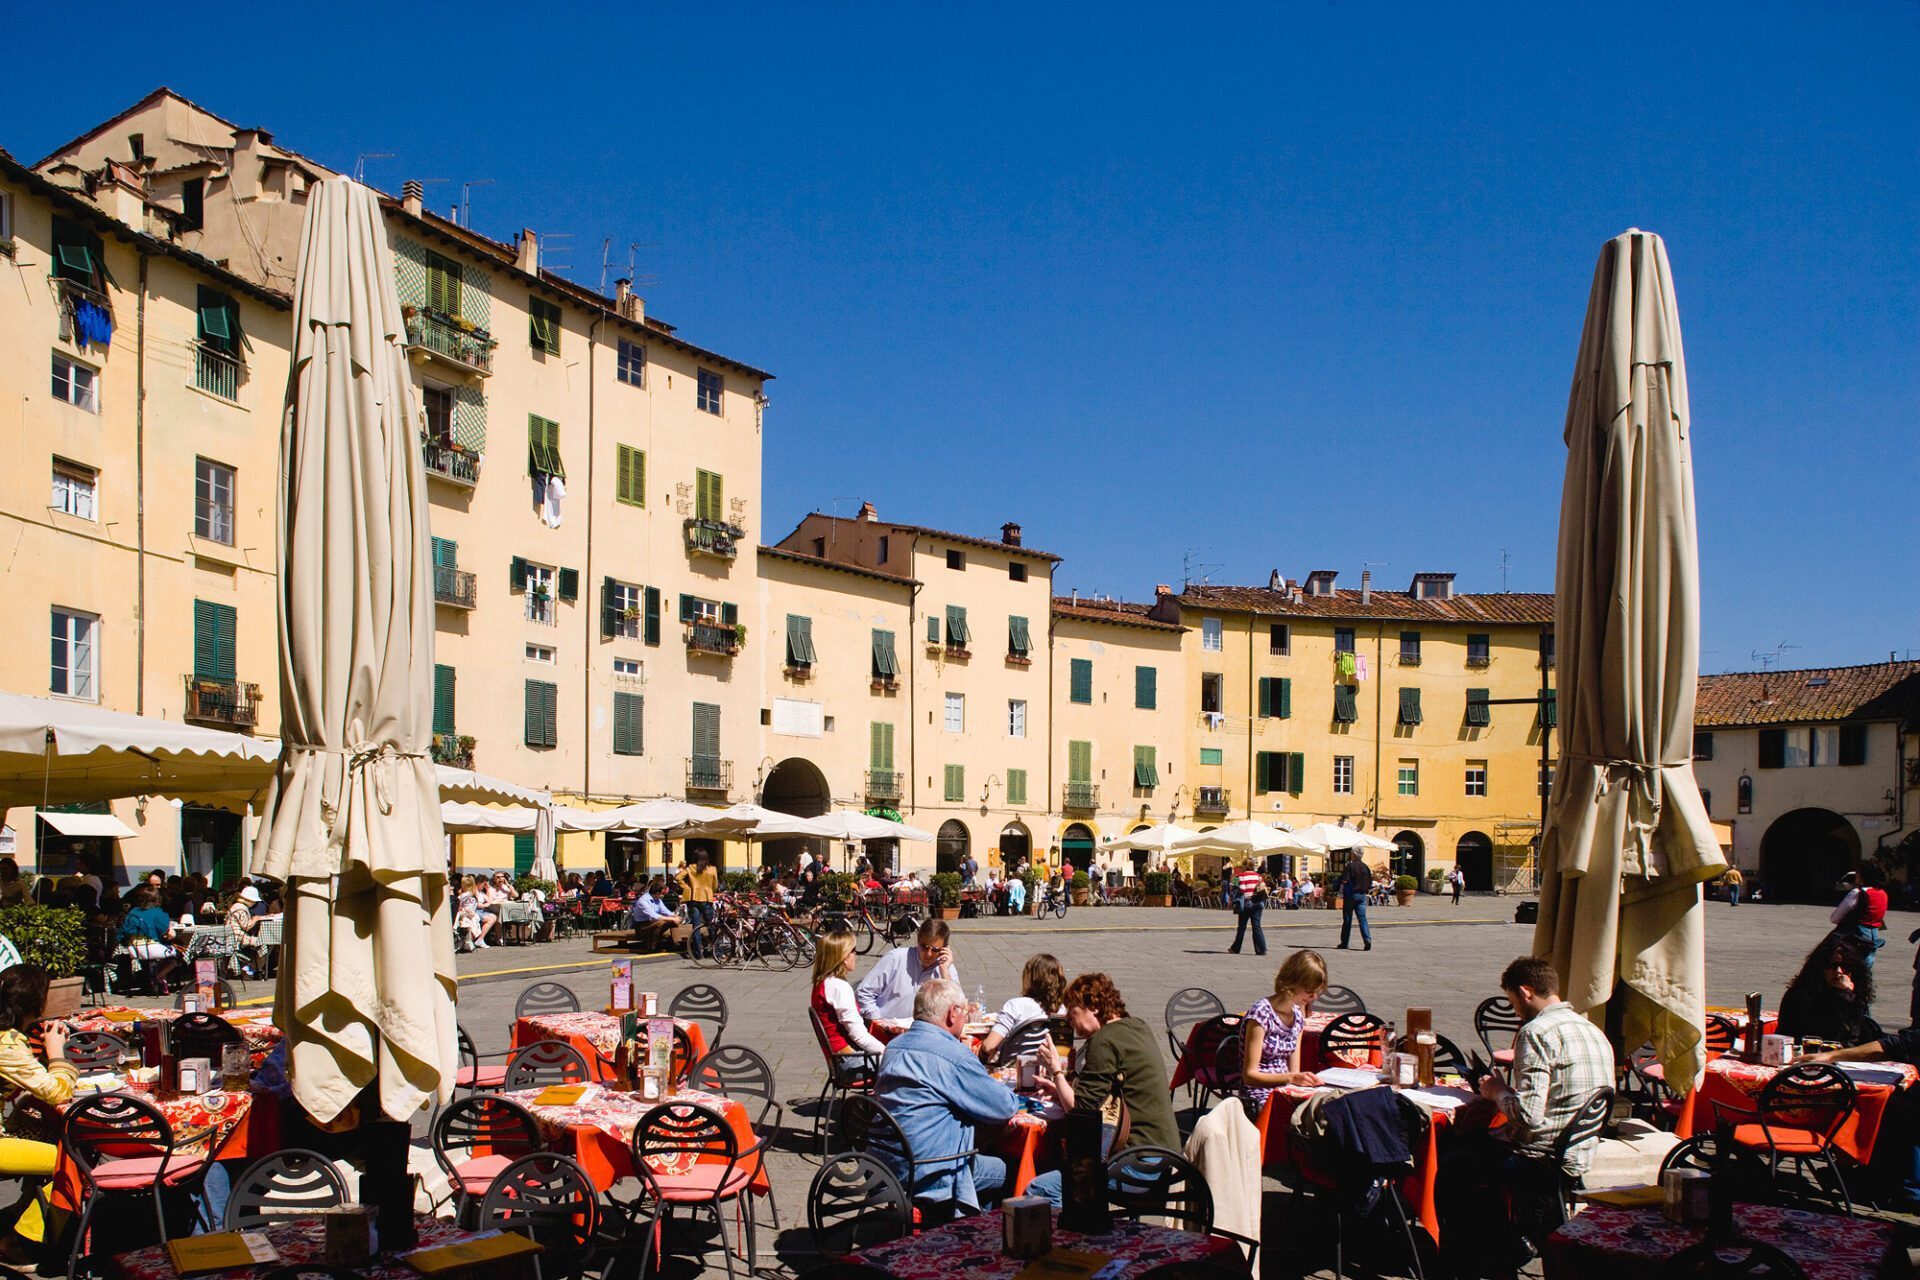 Italy, Tuscany, Lucca district, Lucca, View of Piazza (square) Anfiteatro